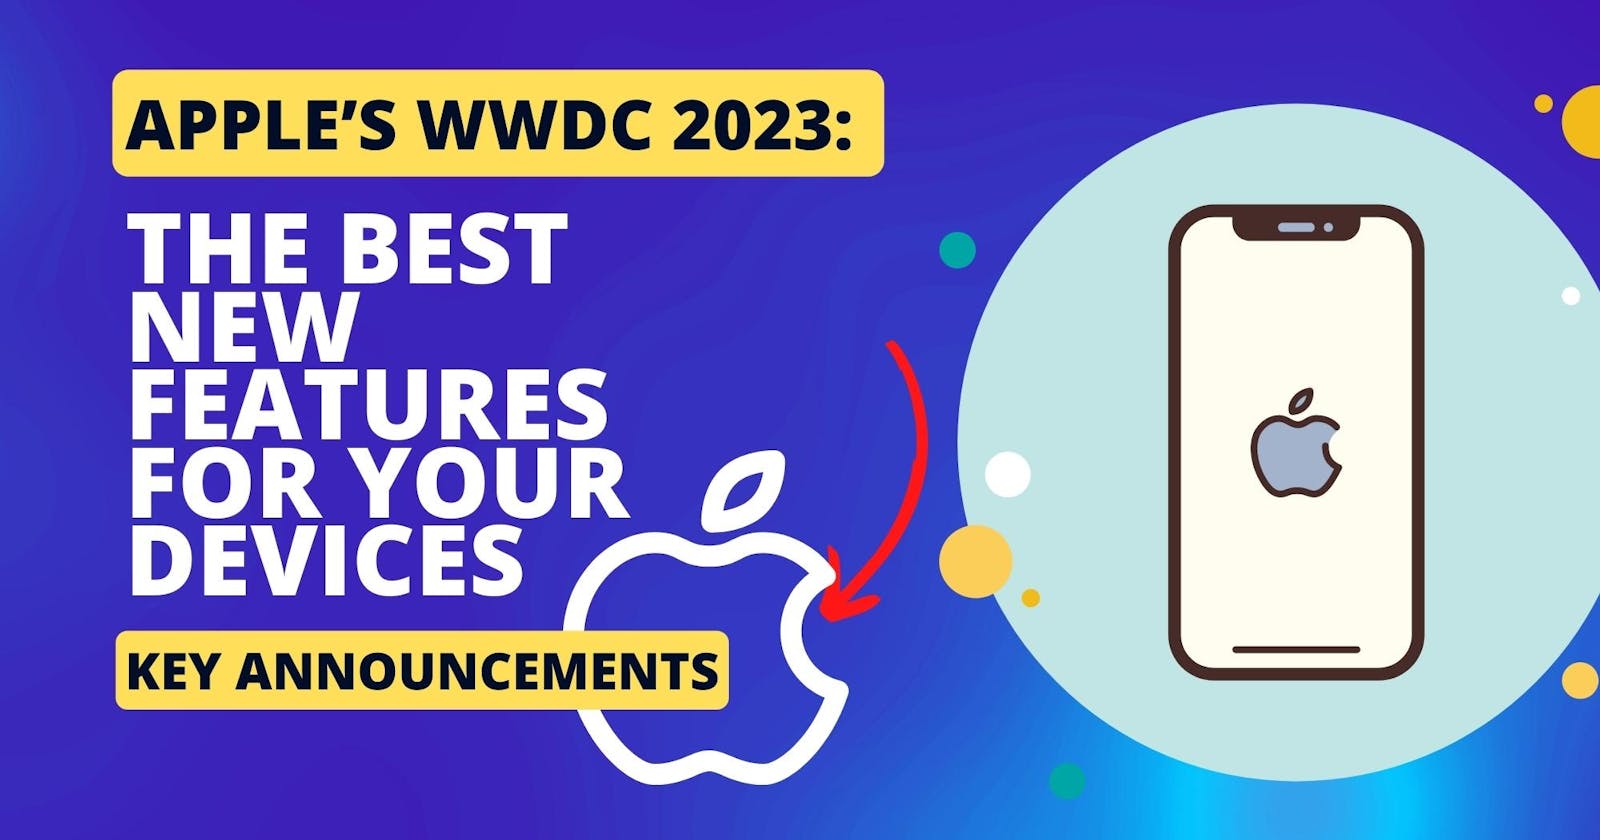 What's New from Apple at WWDC 2023